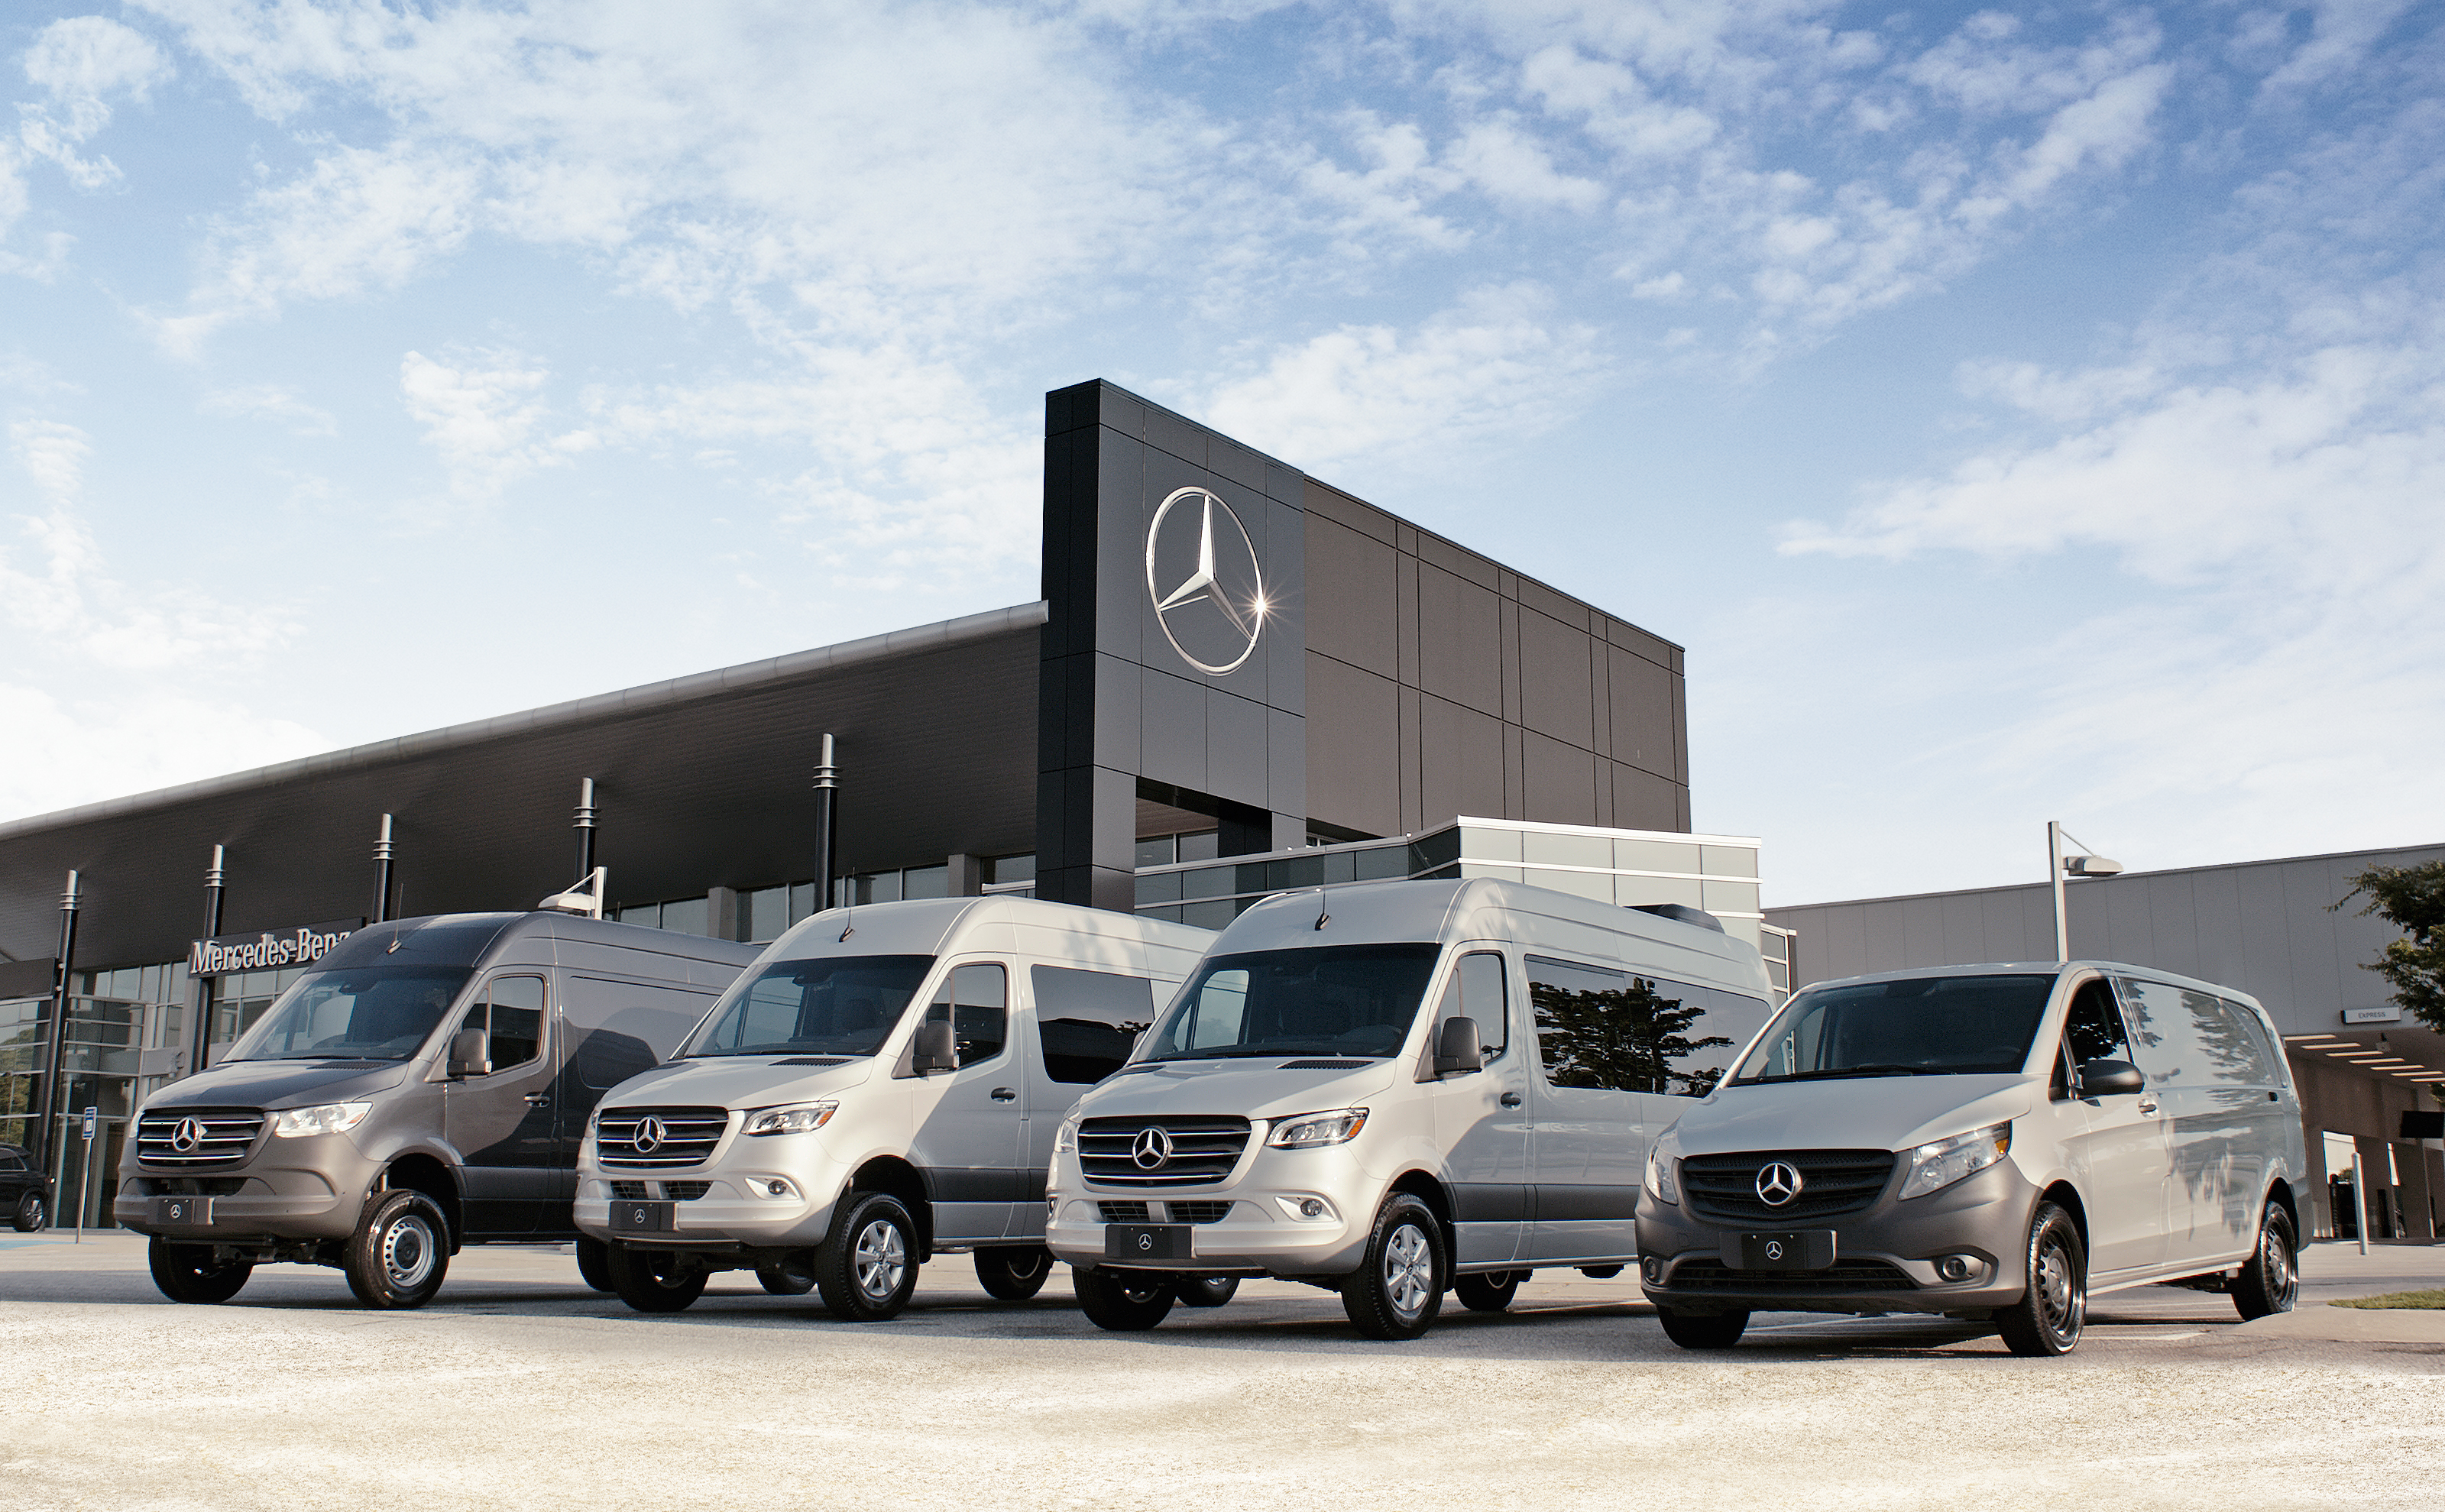 Used Mercedes-Benz Sprinter Vans available near Portland, OR 